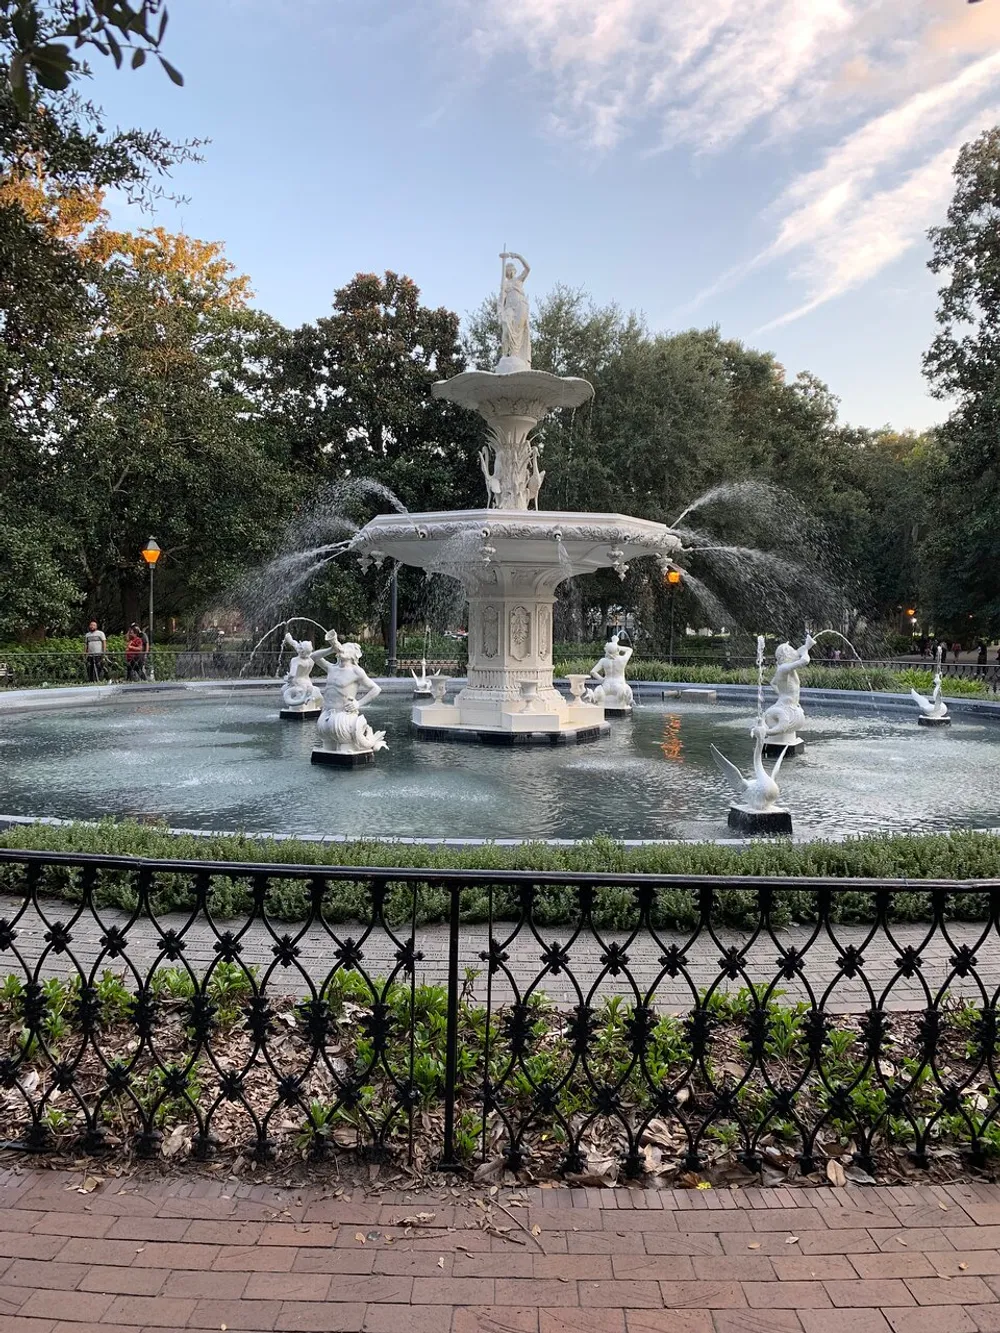 An ornate multi-tiered white fountain with water jets and statues is enclosed by a black wrought-iron fence in a park-like setting at dusk